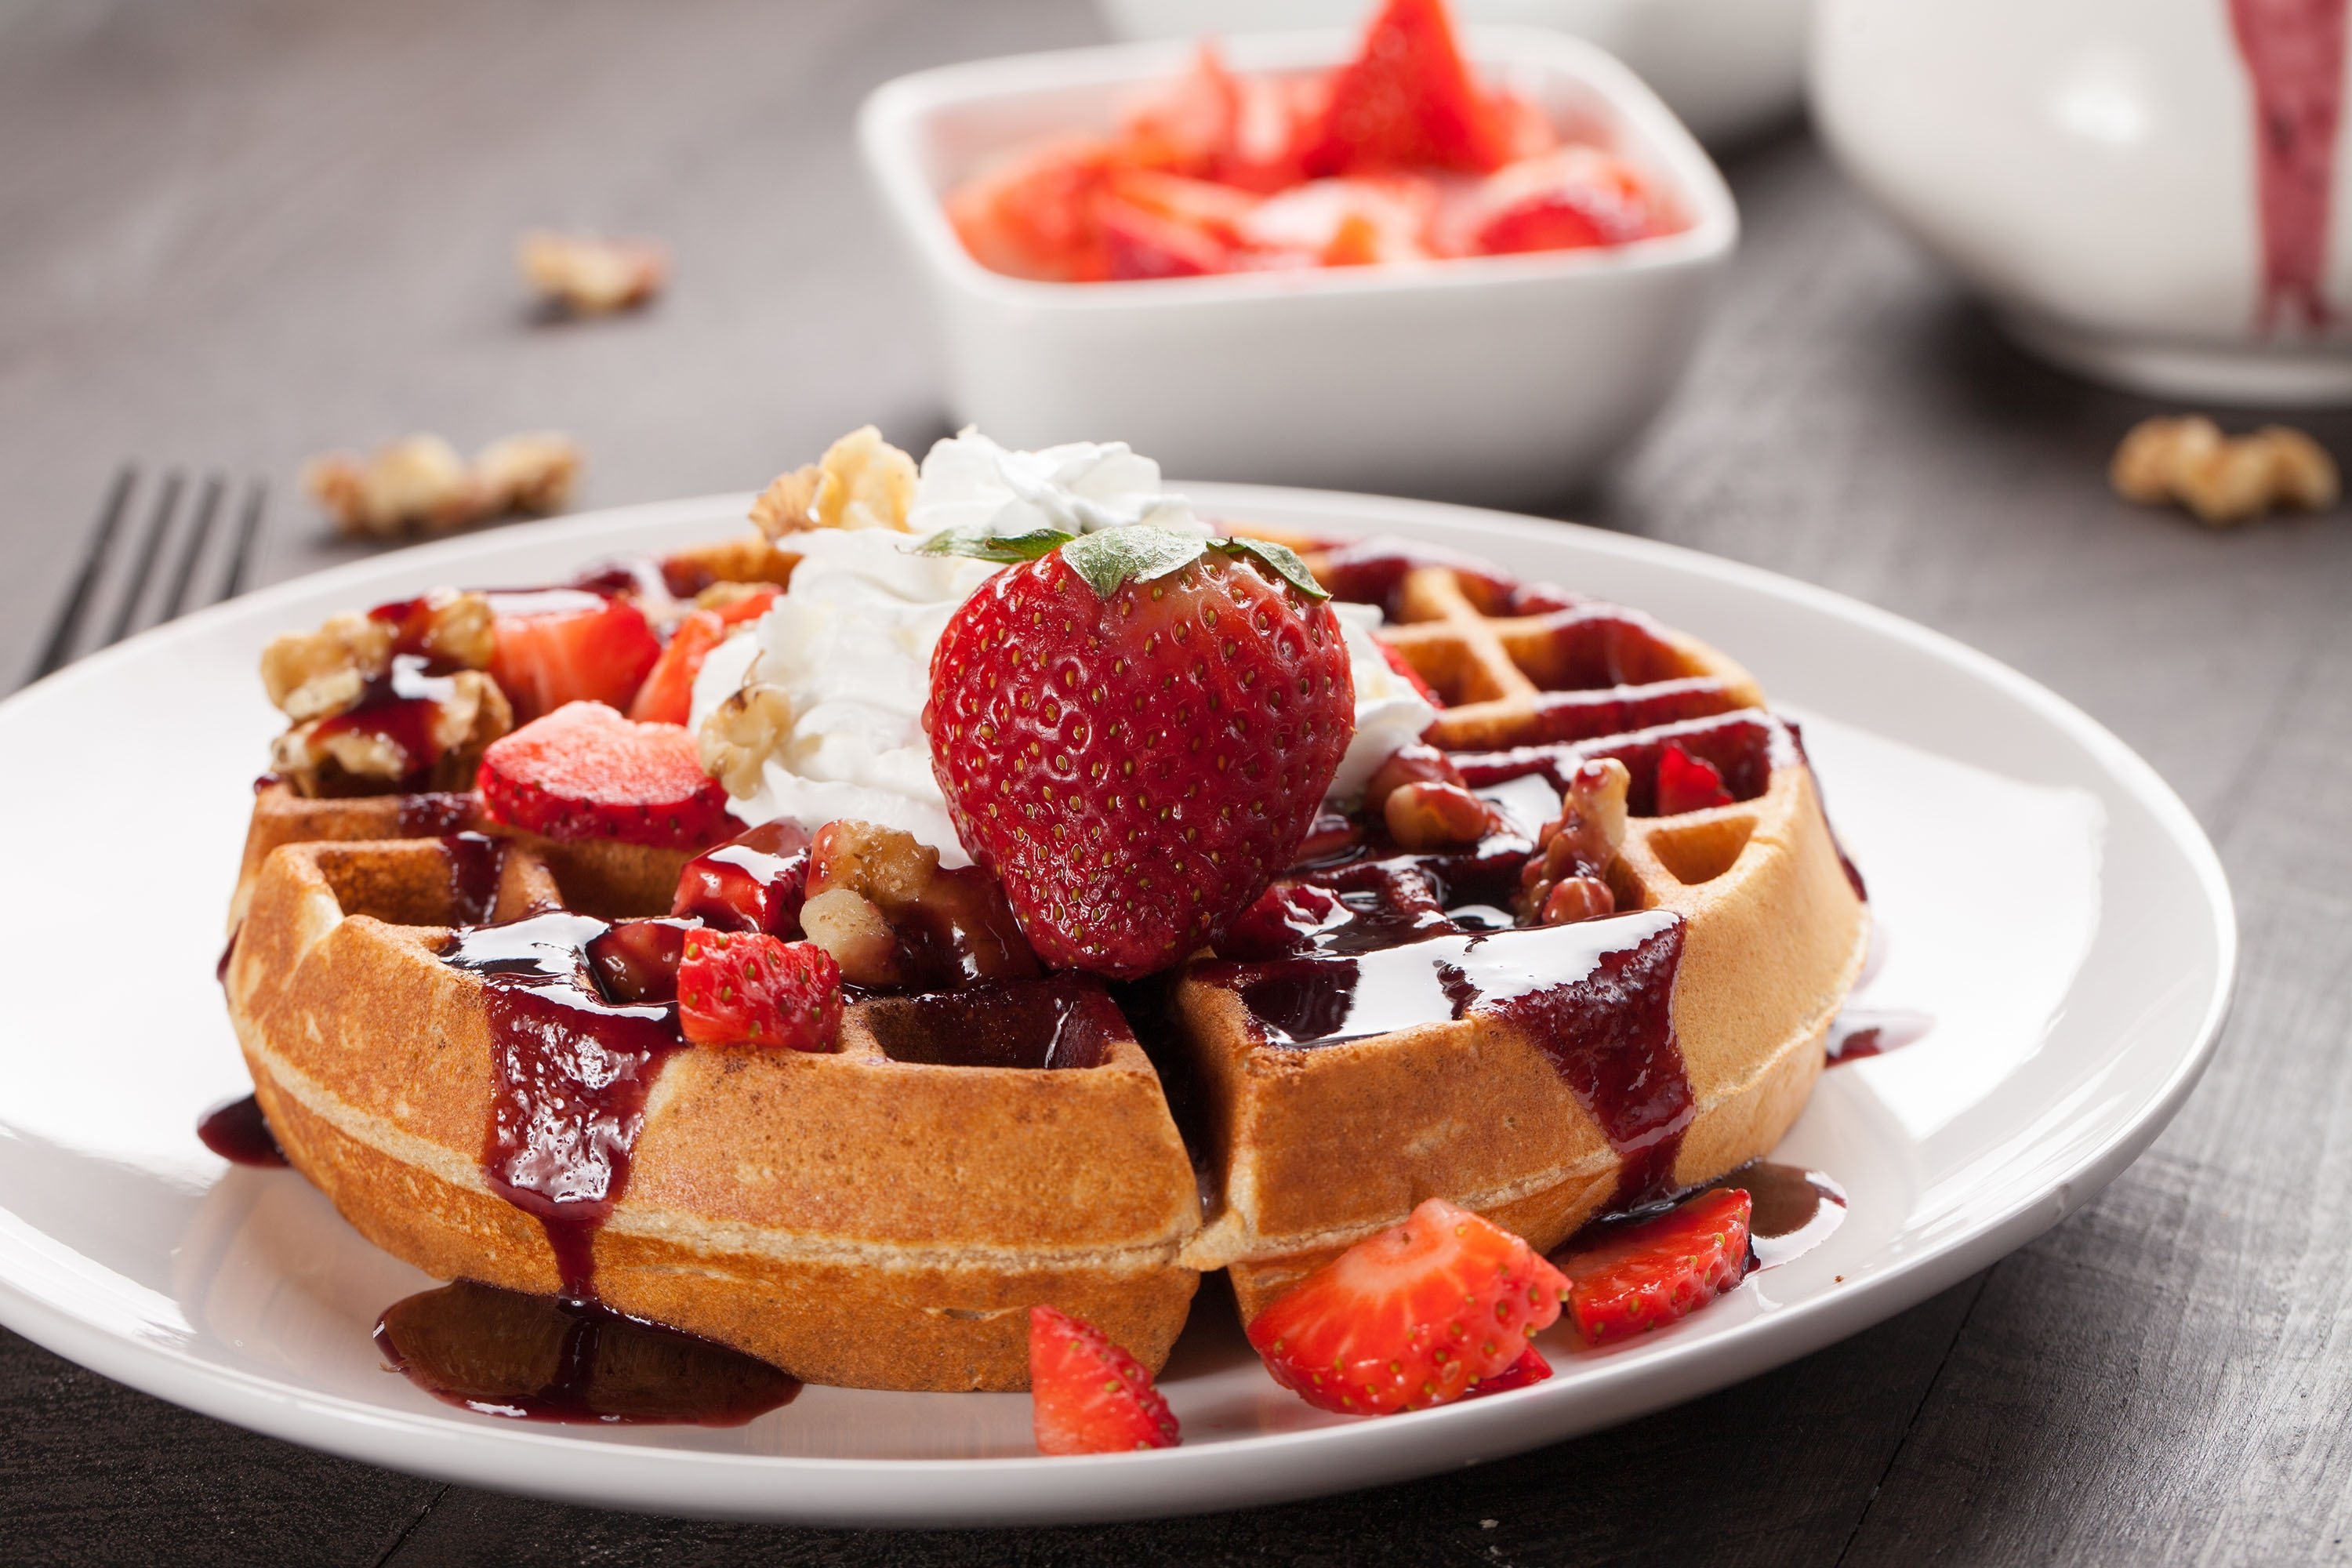 Waffles topped with boysenberry syrup and whipped cream. (Shutterstock Photo)